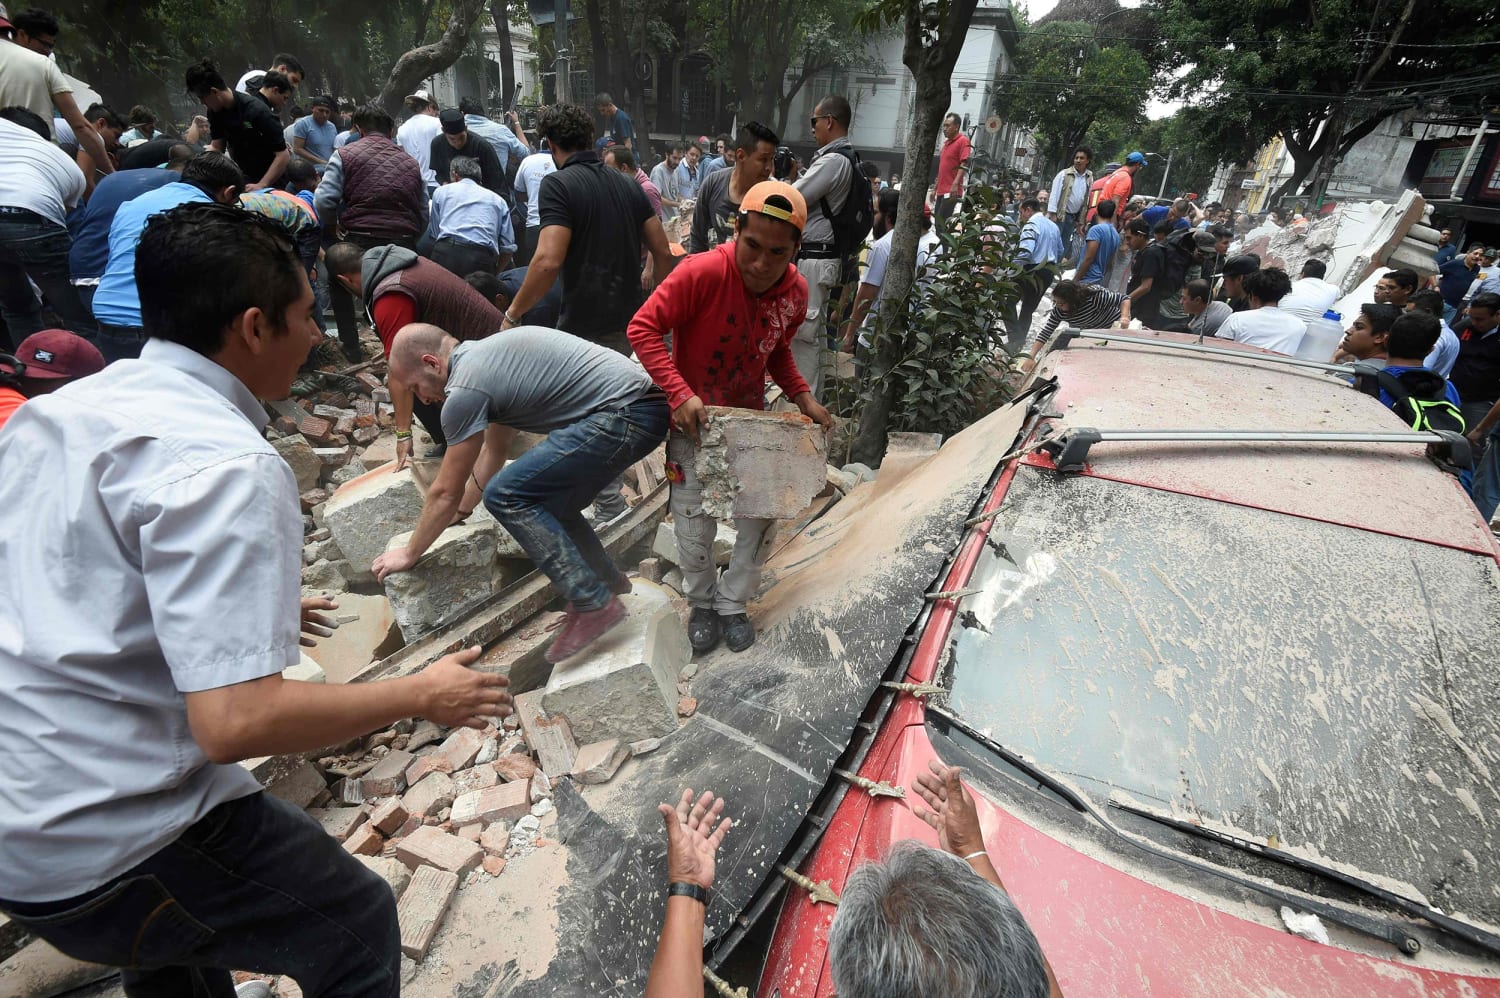 Over 200 buildings damaged in Mexico quake that killed 2: Official